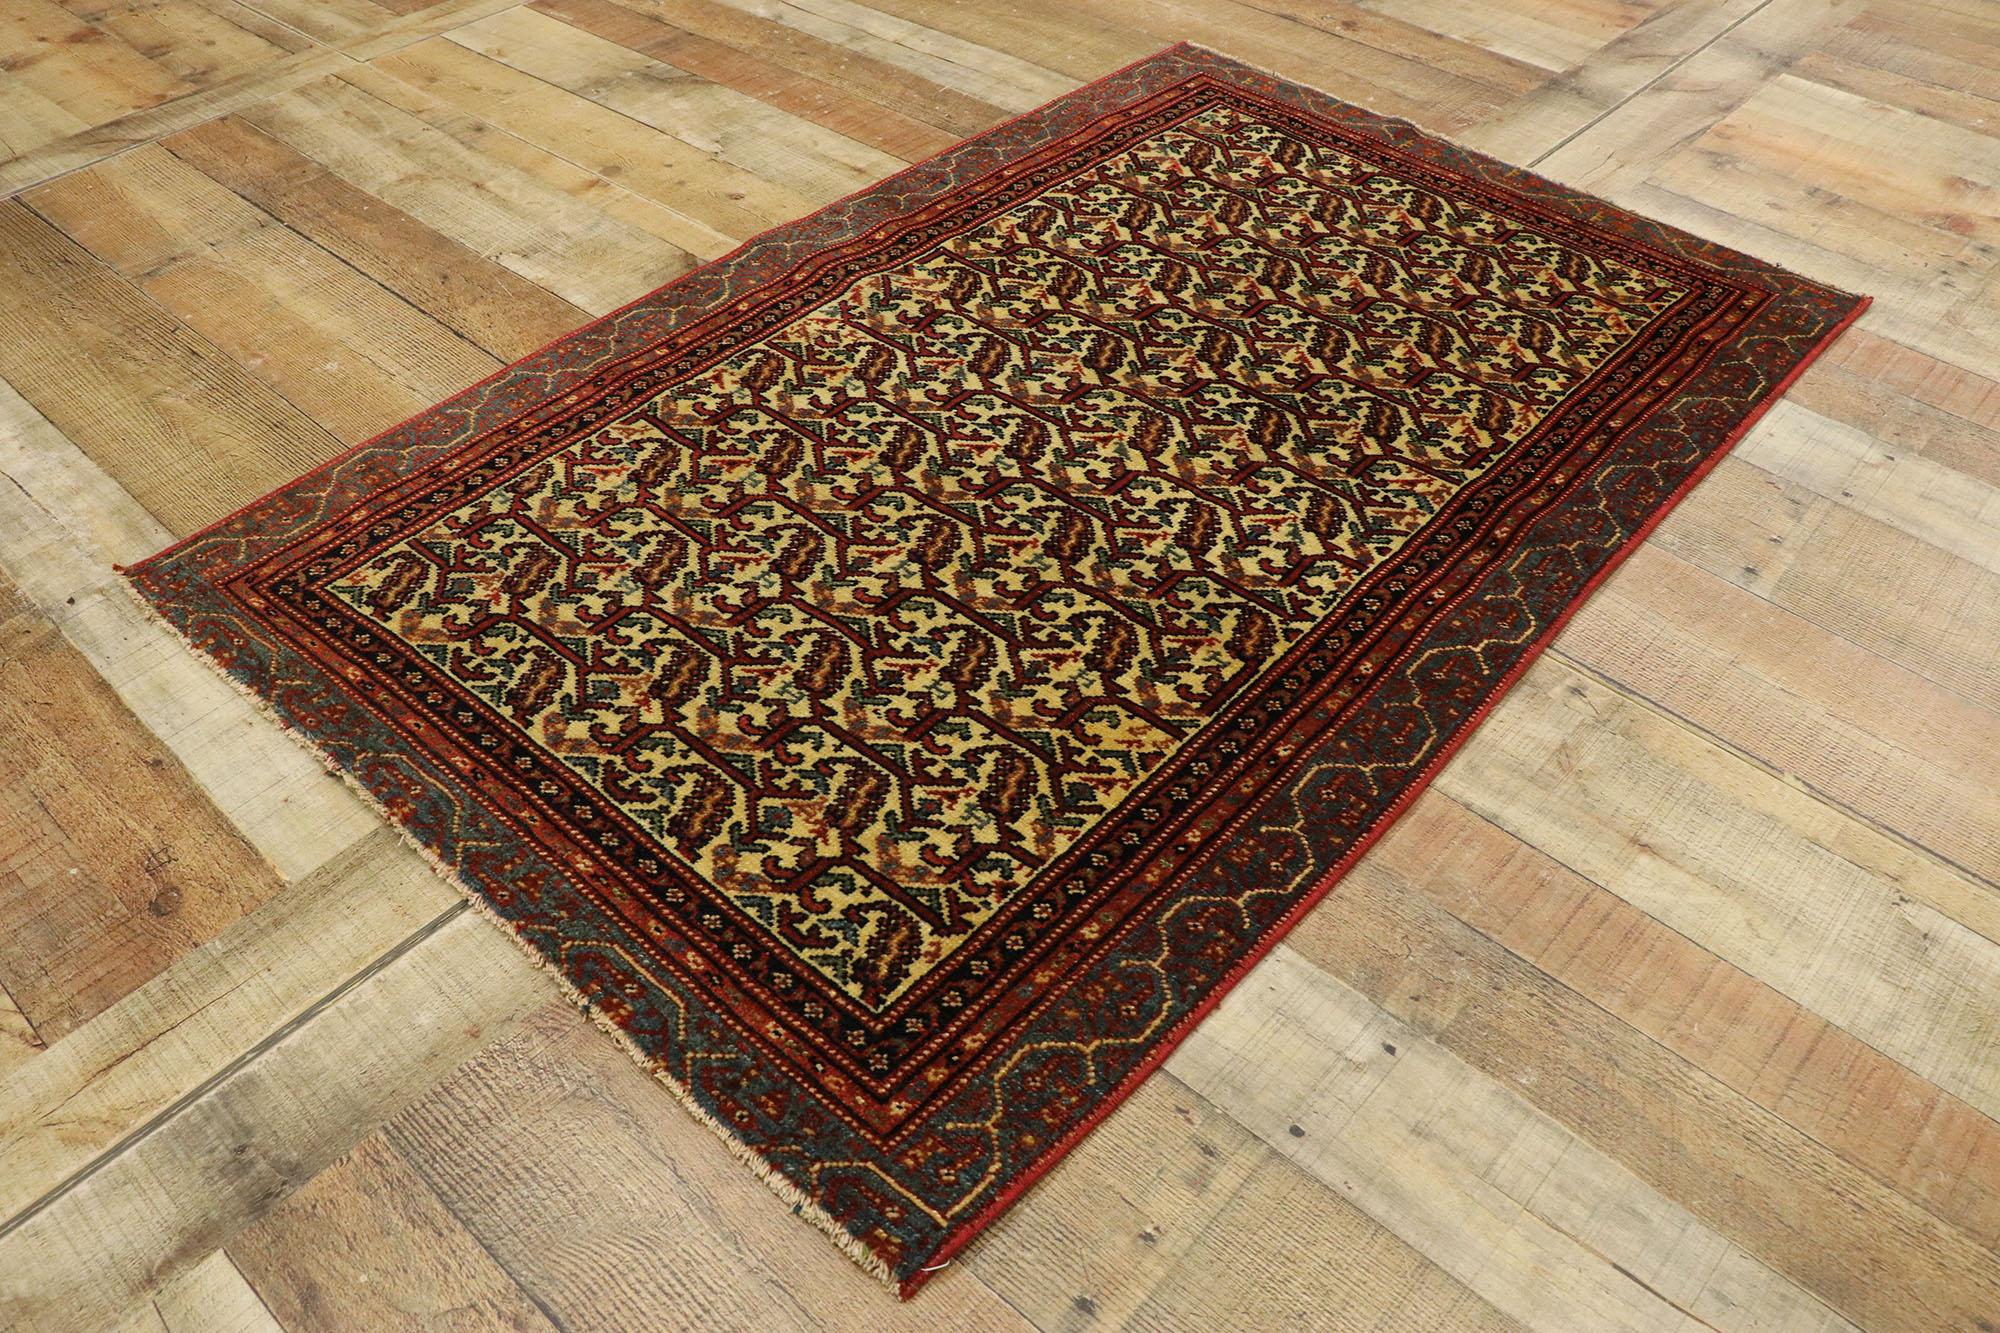 20th Century Vintage Persian Malayer Rug with Boteh Design and Arts & Crafts Style For Sale